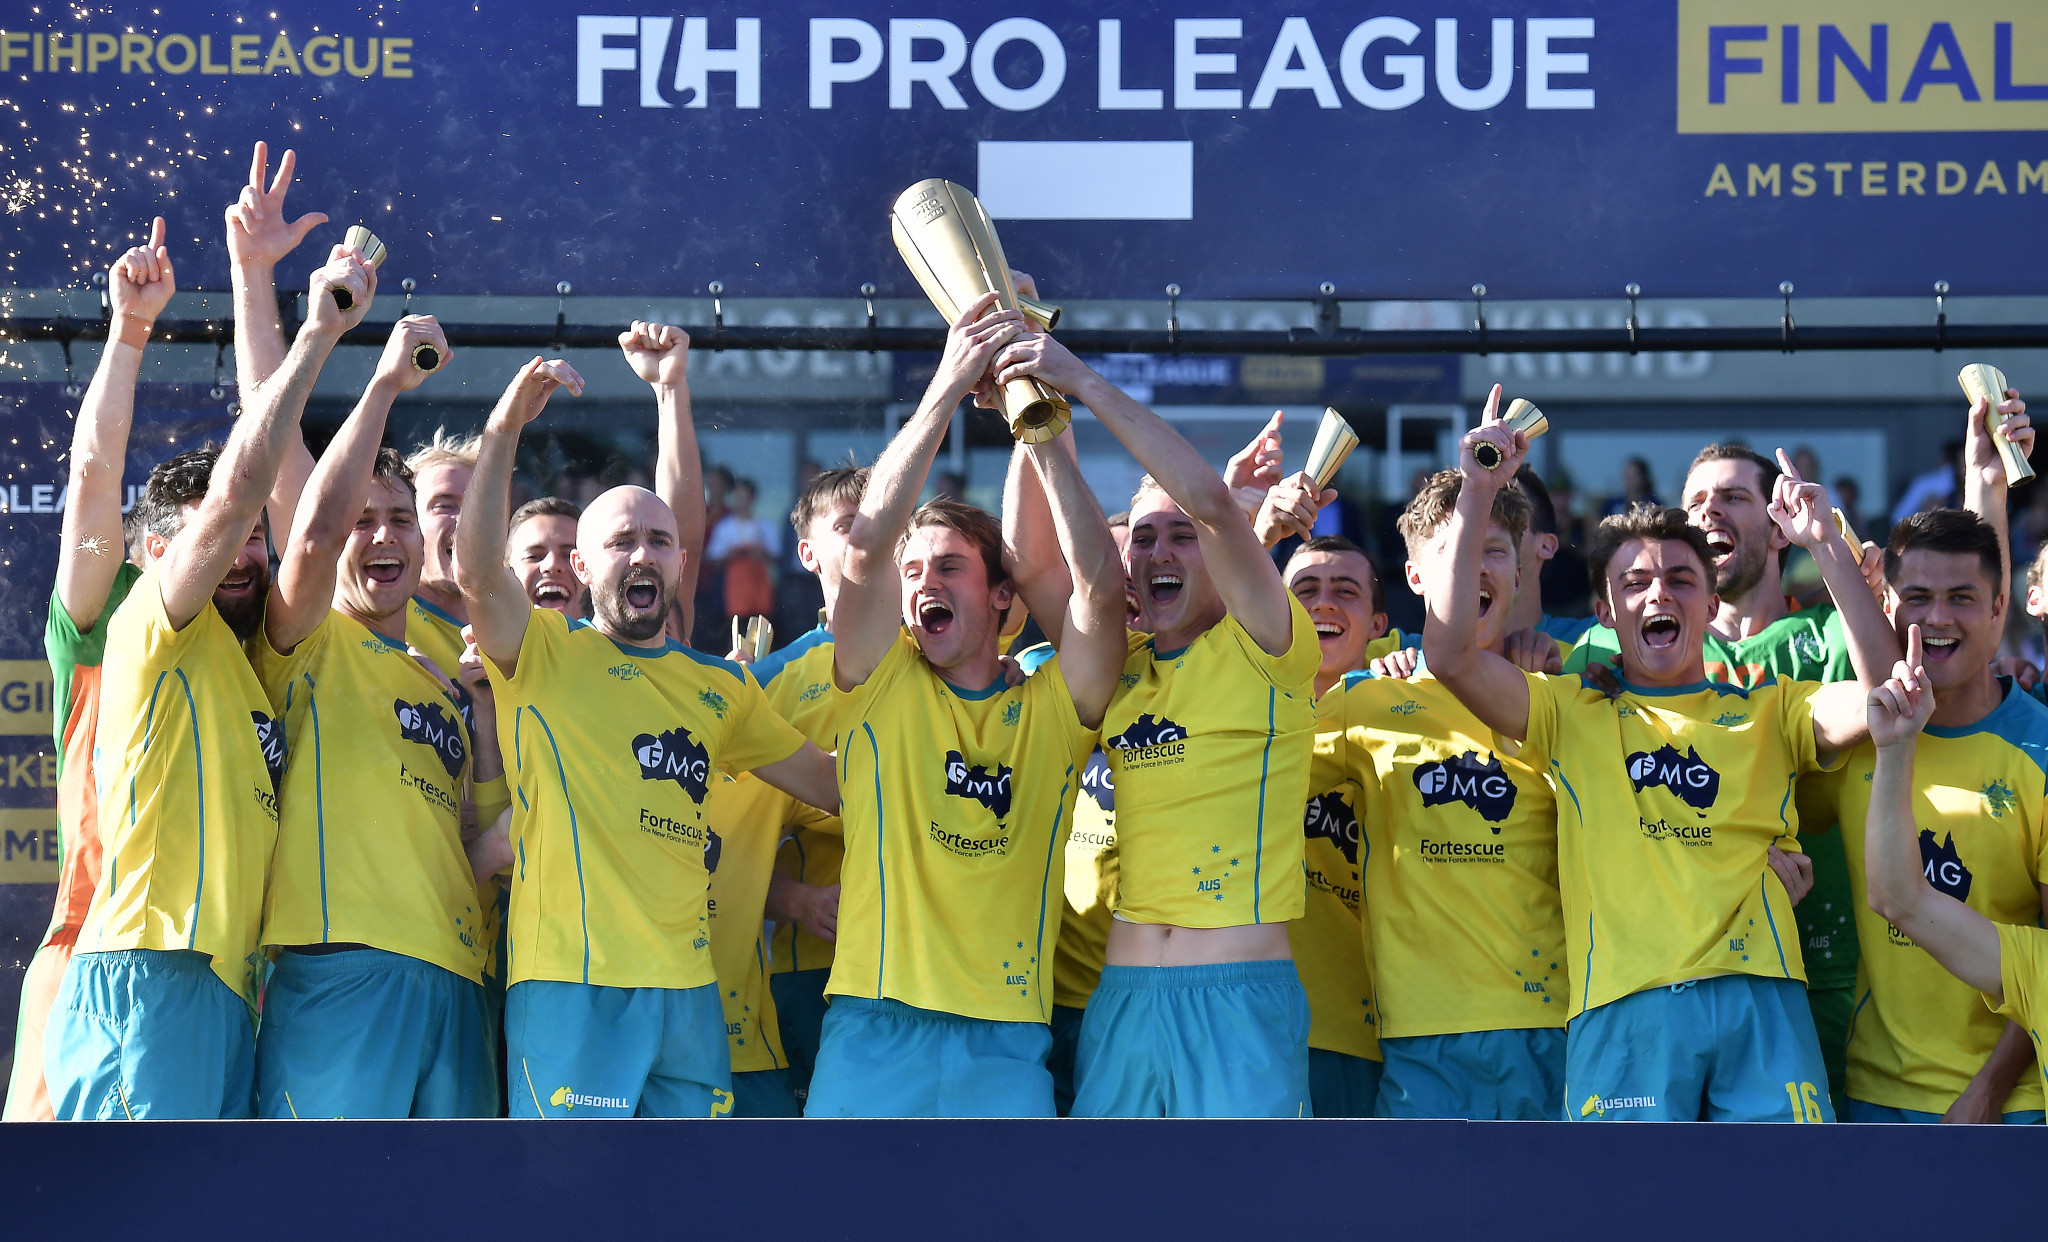 Australia's men's team won last year's FIH Pro League with victory over Belgium ©Getty Images